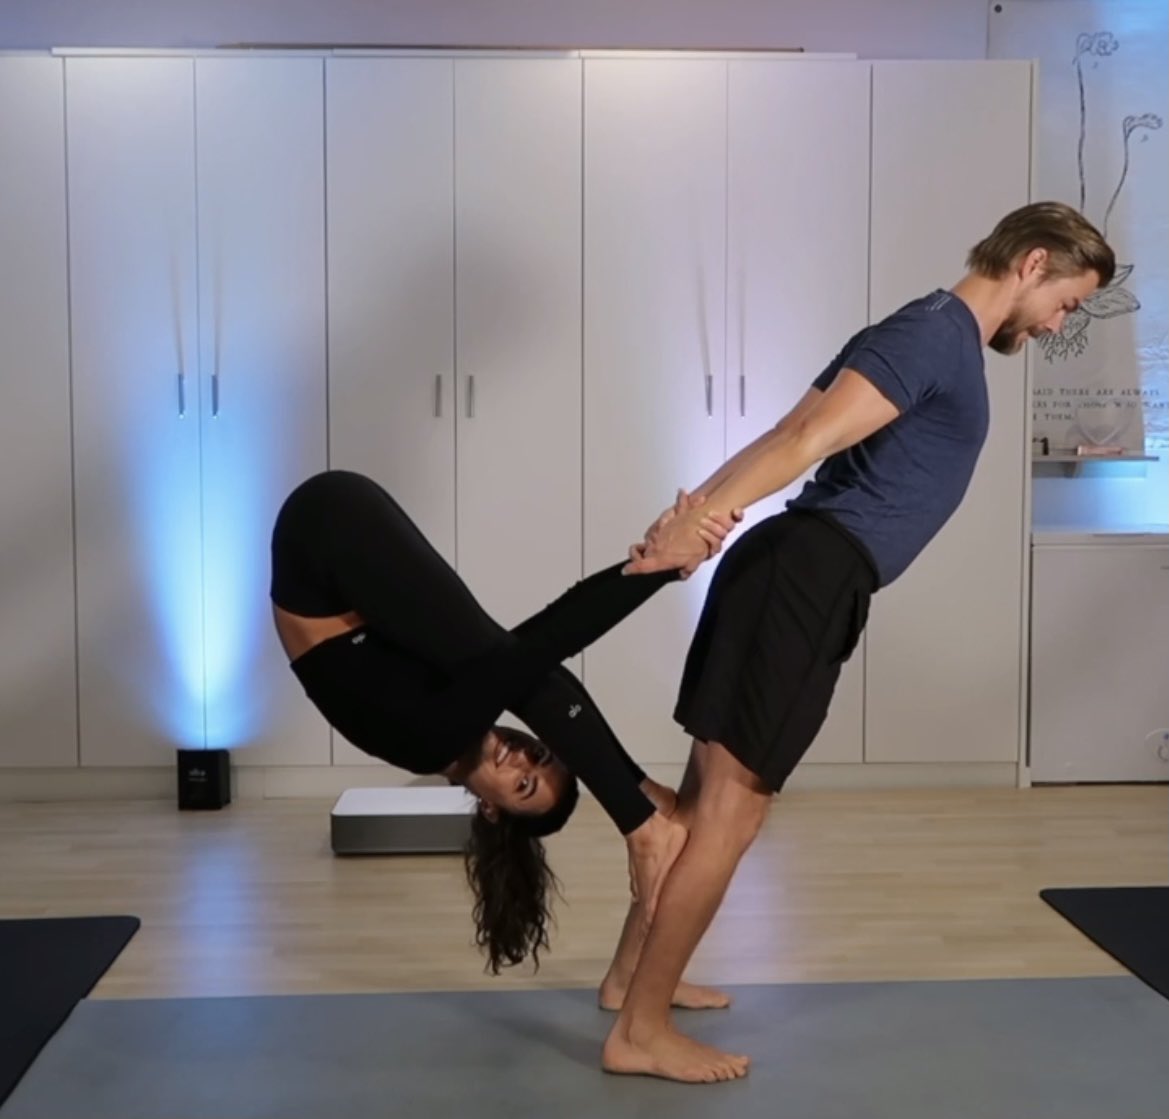 5 Partner Exercises for a Valentine's Day Workout! - Nourish, Move, Love